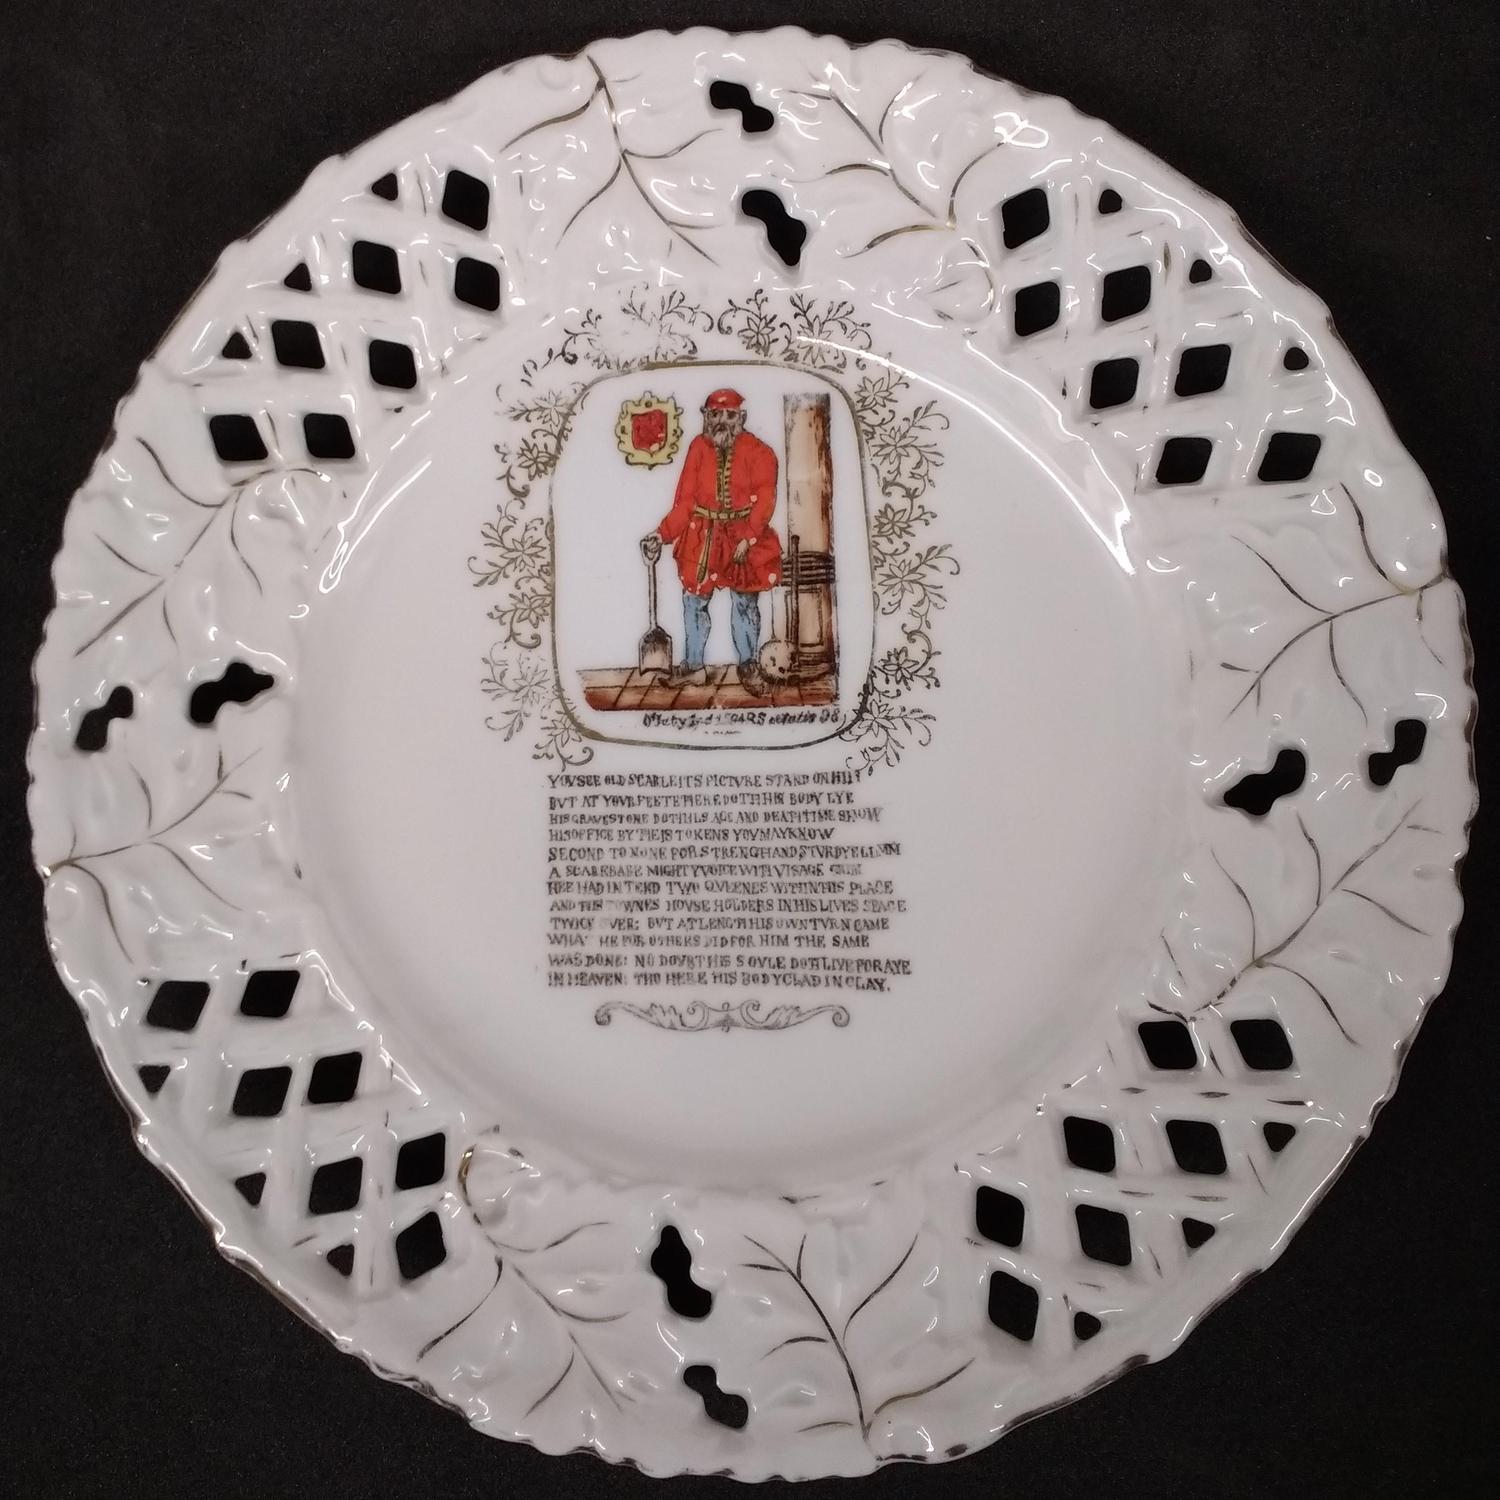  An ornamental china ribbon plate with a transfer print of Old Scarlett, the infamous grave digger. The image is printed in reds, yellows and browns and the plate has diamond shaped pierced edges and a leaf design in gold.